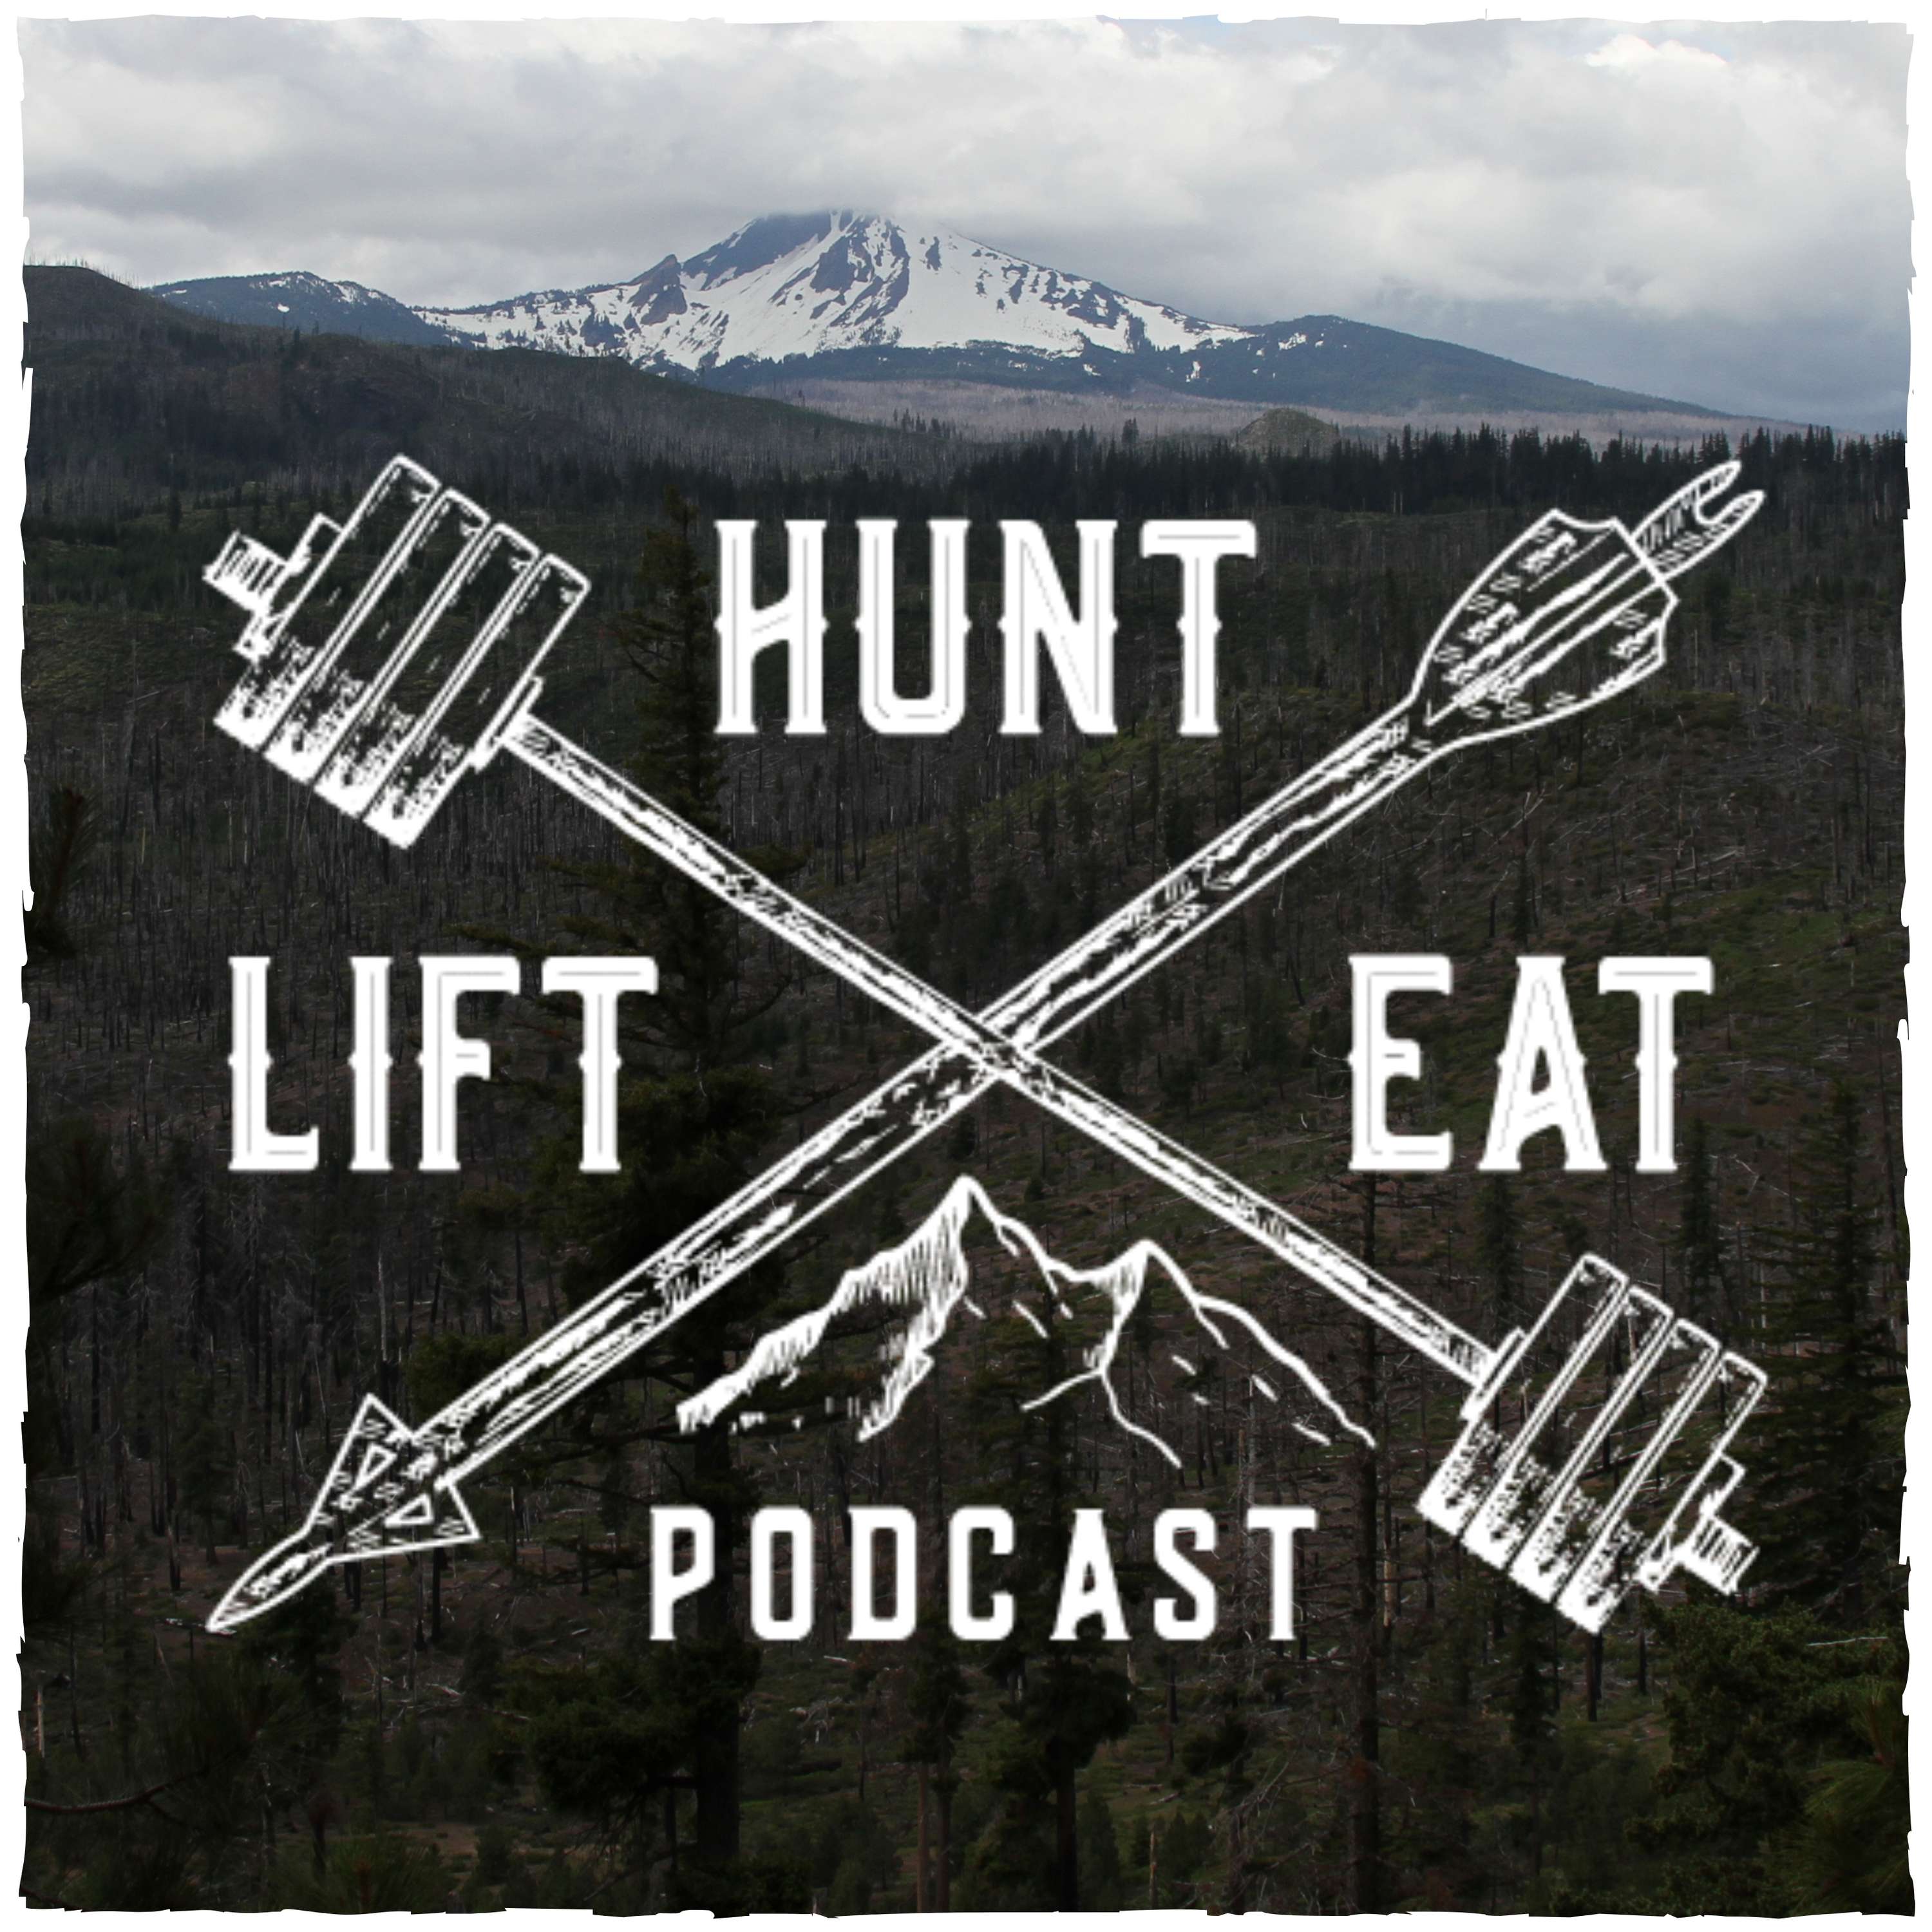 EP 163: Rekindling Resilience: The Healing Power of the Outdoors with Kirstie Ennis